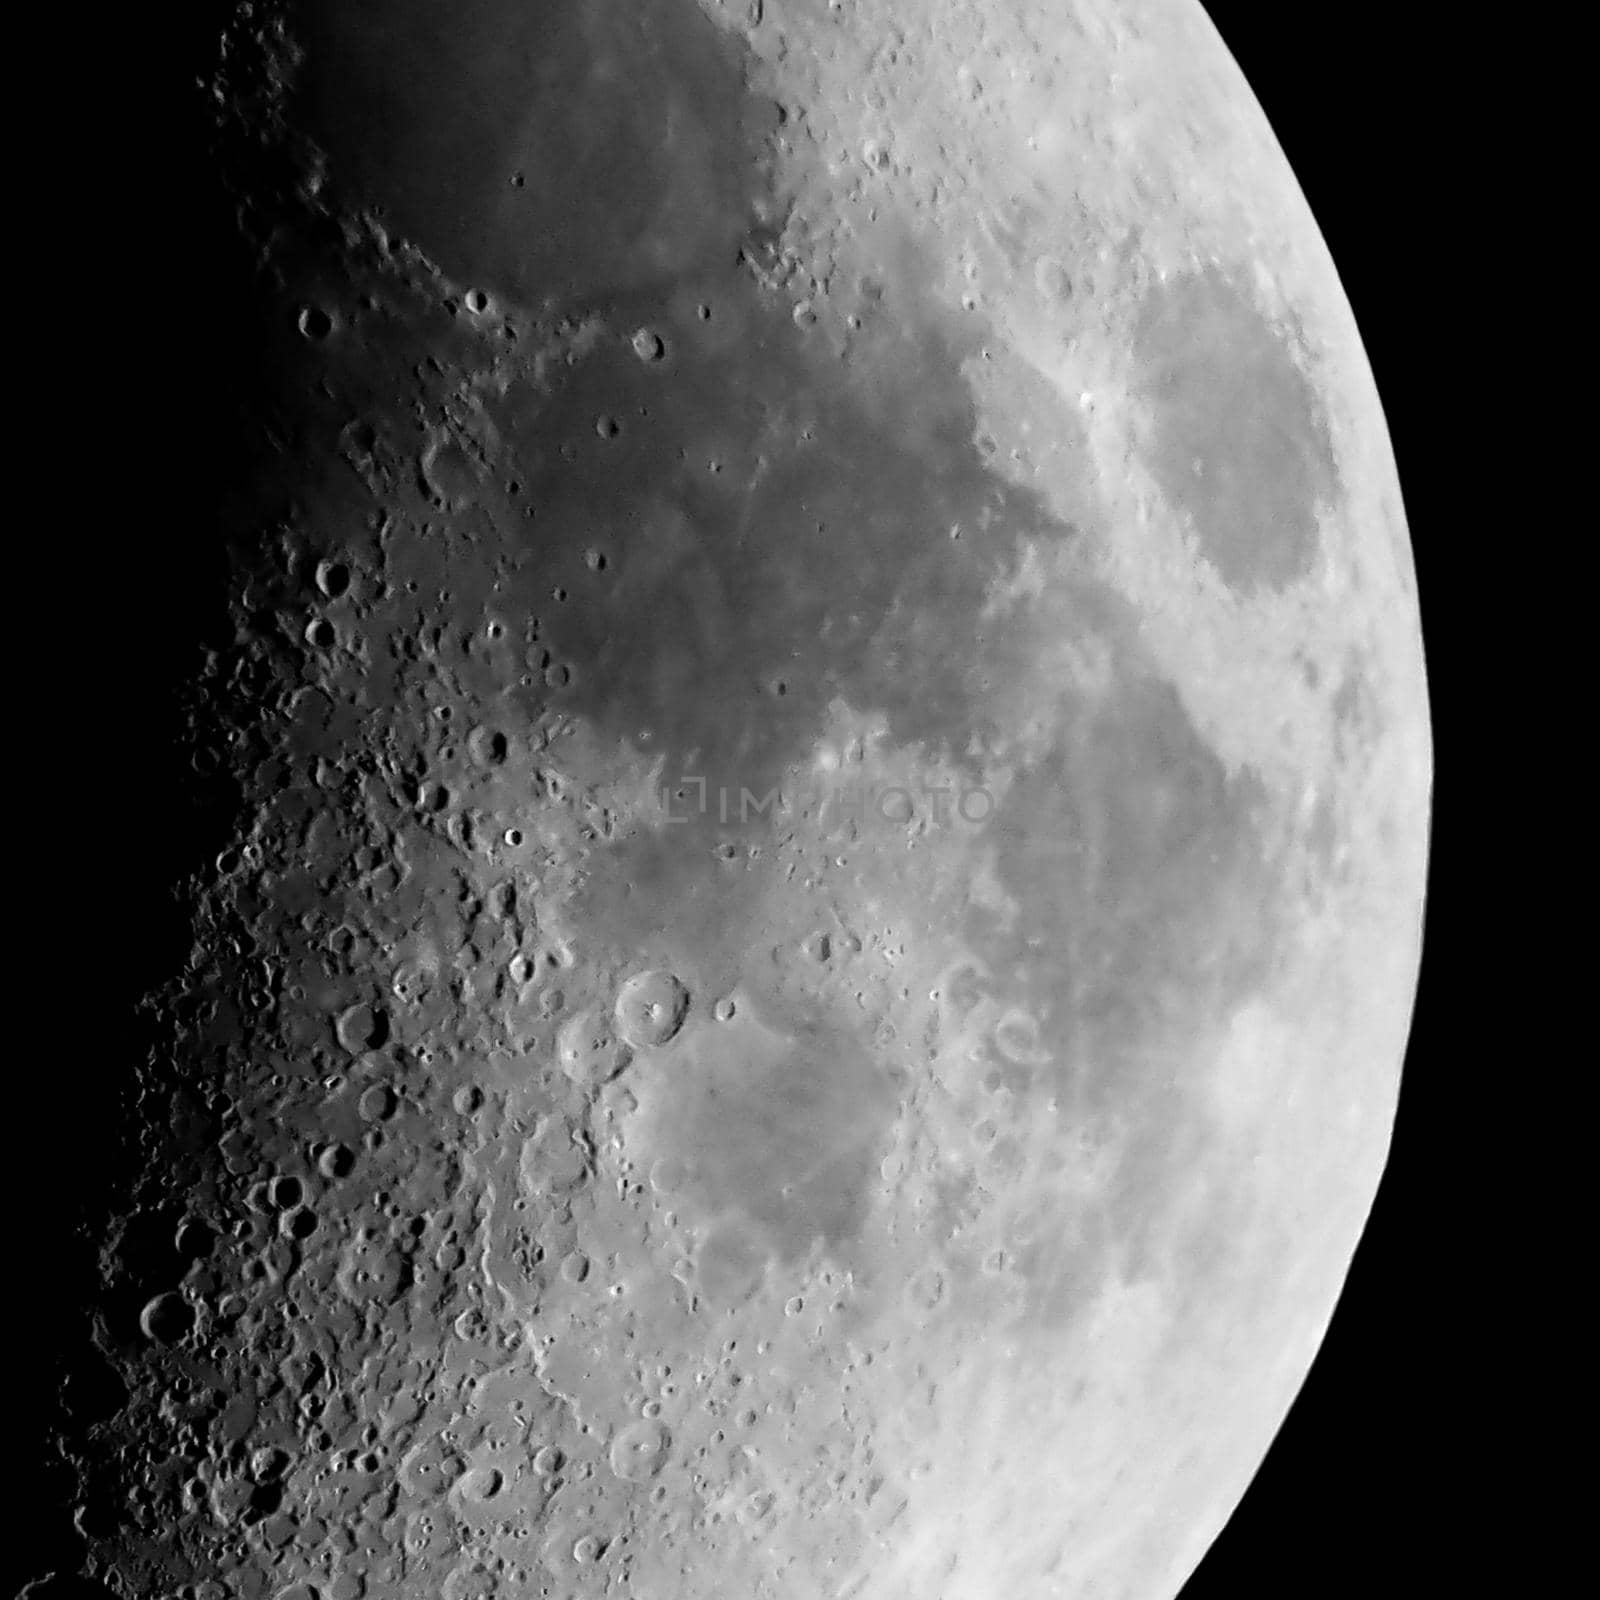 First quarter moon seen with an astronomical telescope, detail in black and white